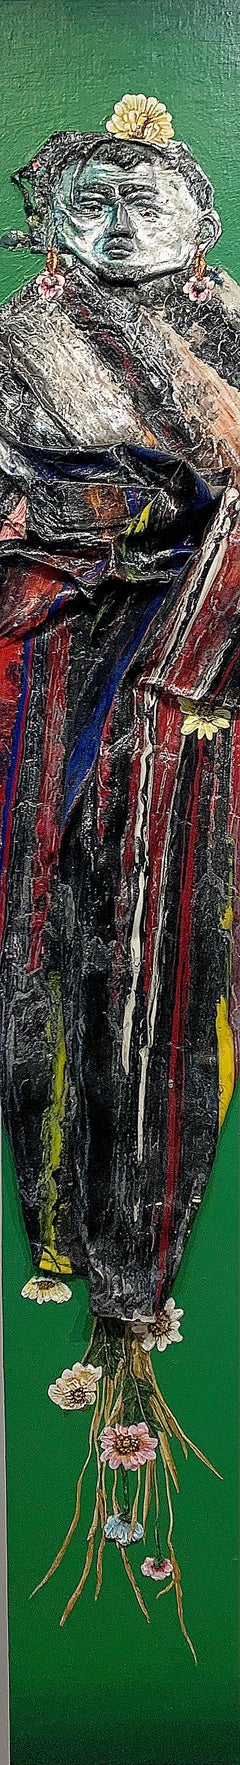 Shaman, acrylic on canvas painting, green robe, red, gray